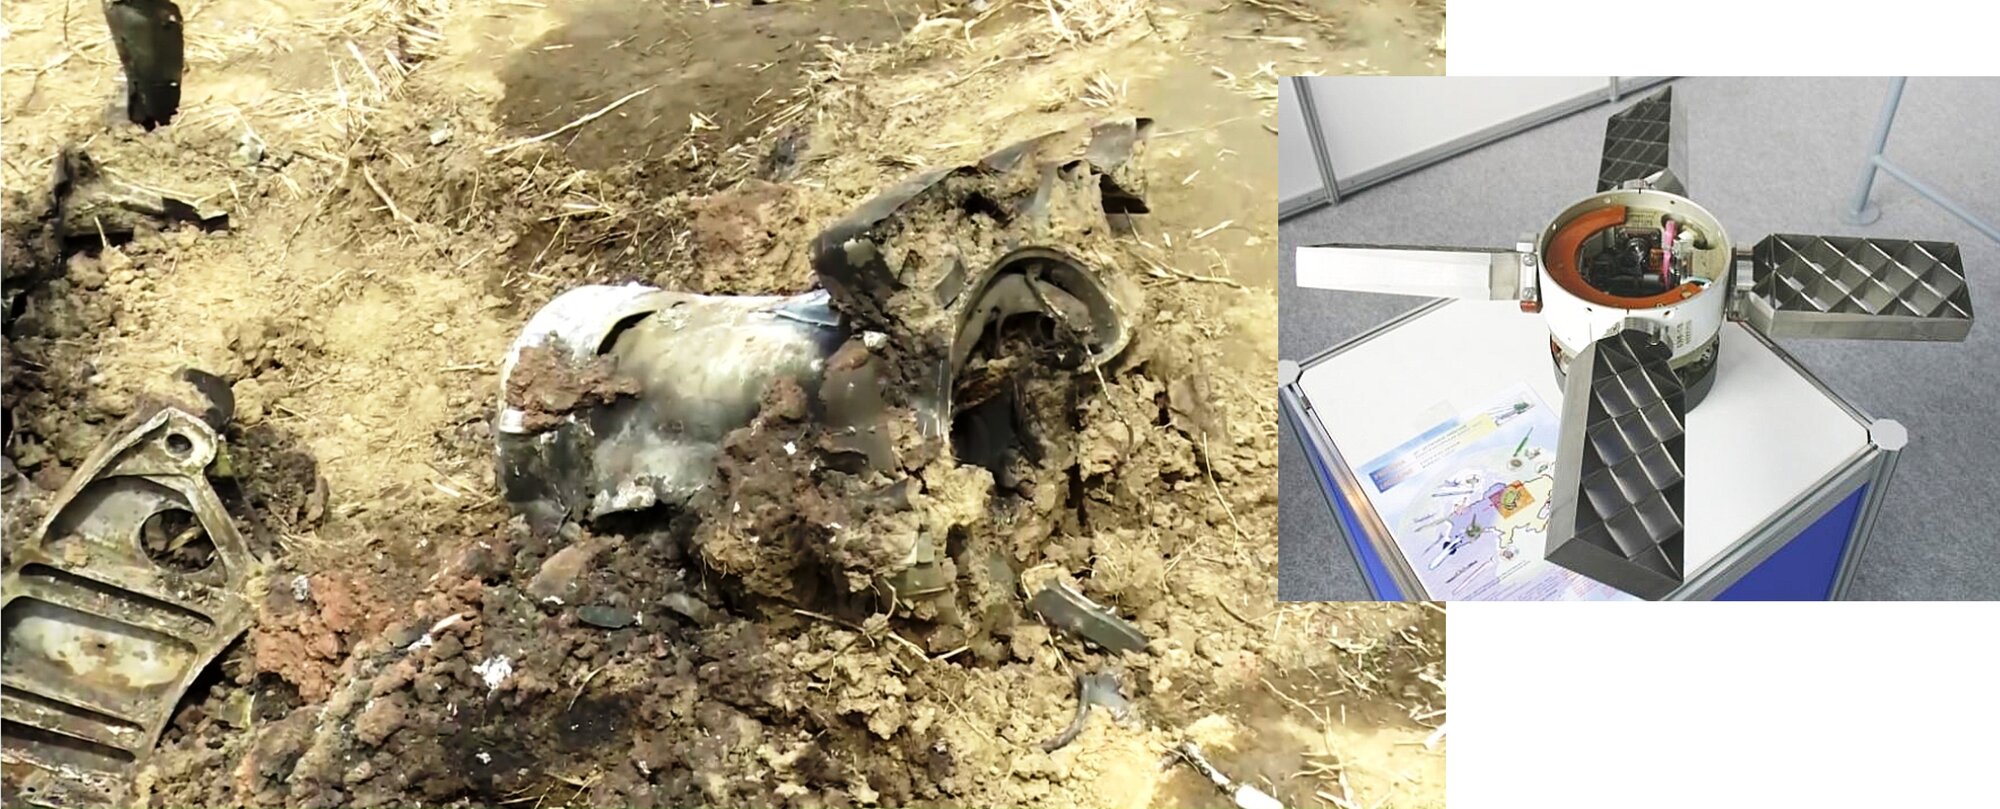 WRECKAGE of Indian Jet in Pak 27-2-2019(17R-77 Tail control section)-e1.jpg